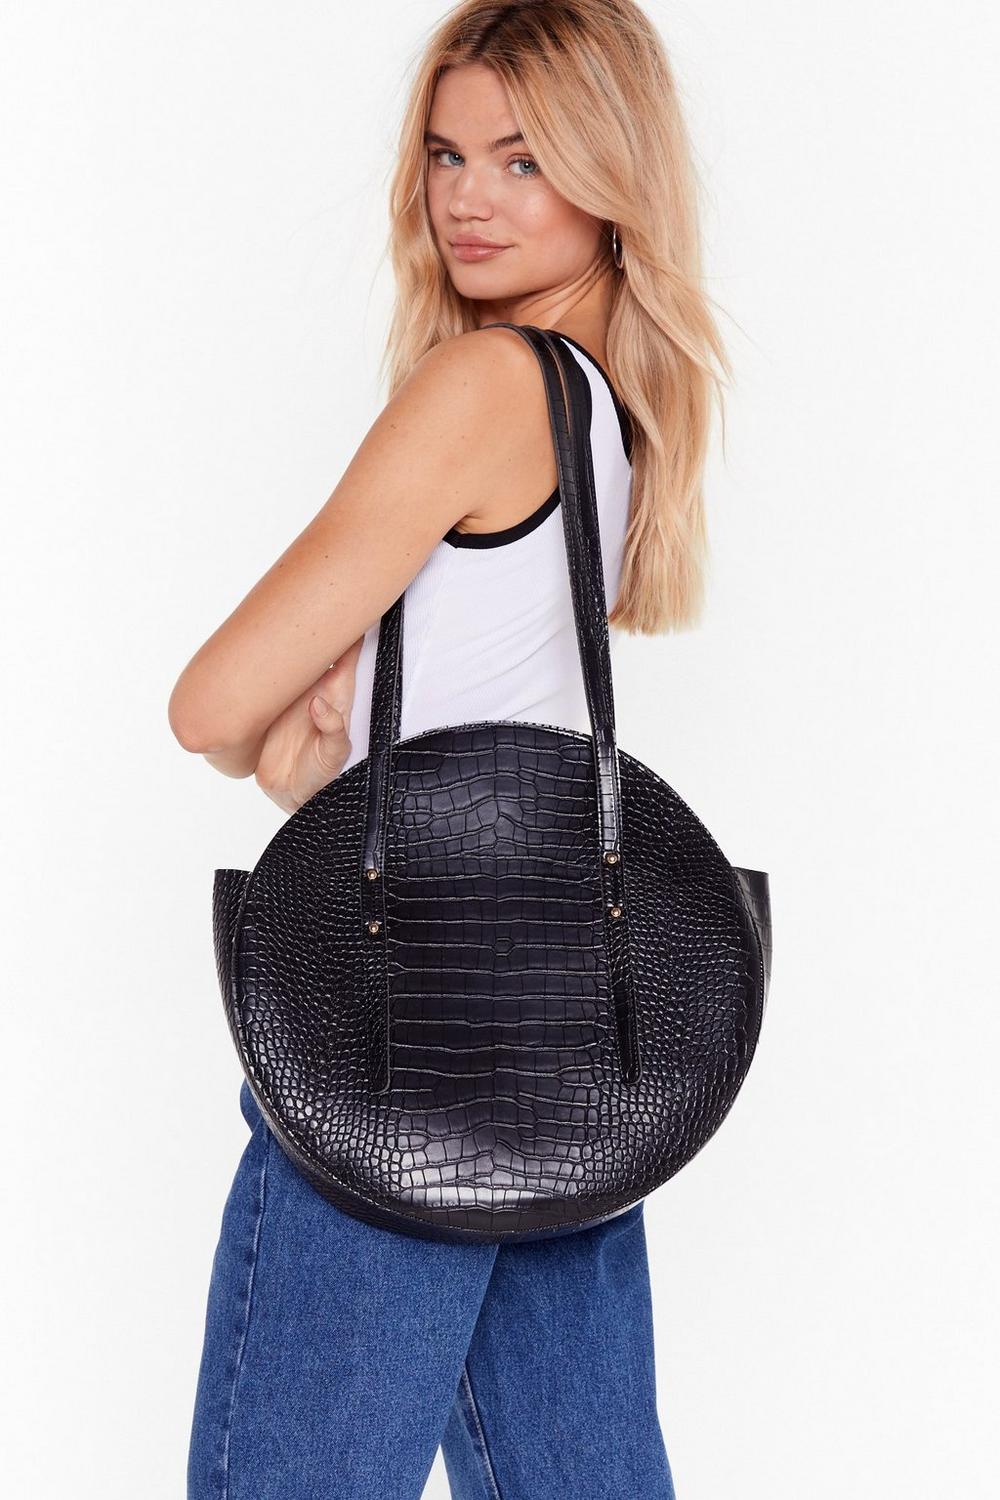  Goin' Round in Circles Croc Tote Bag | Shop Clothes at Nasty Gal!